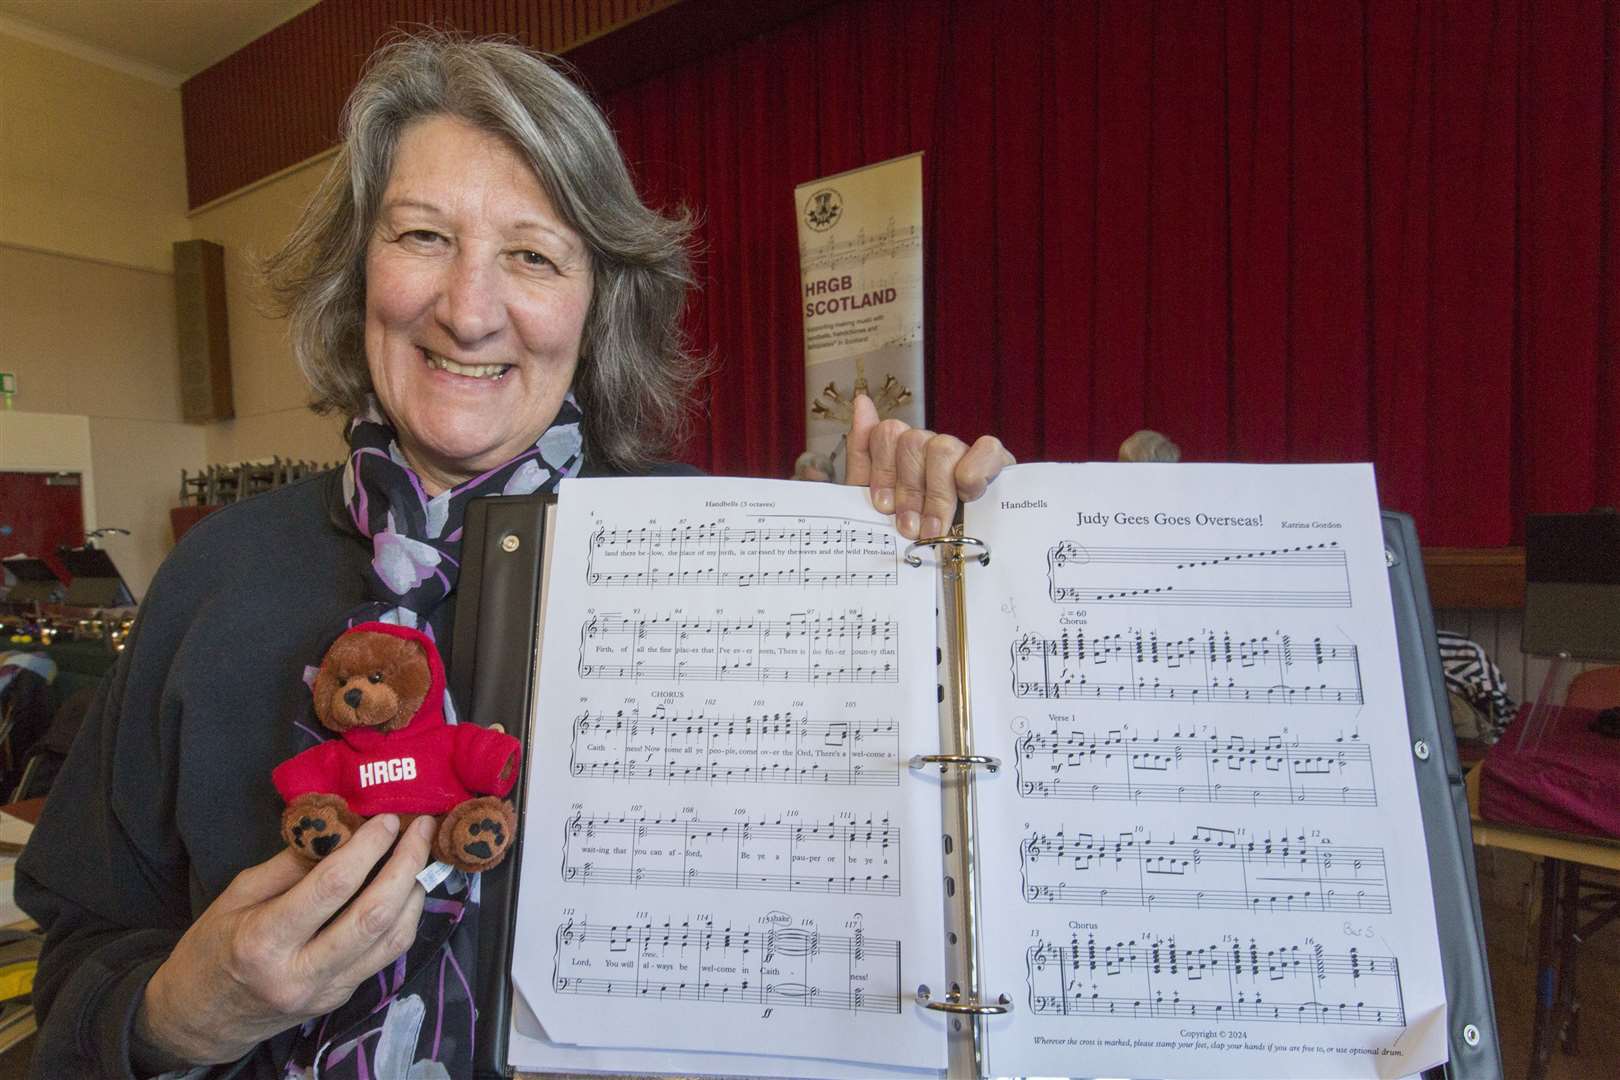 The new secretary of the Handbell Ringers of Great Britain, Judy Gees. The first item performed during the concert was Judy Gees Goes Overseas, which was receiving its world premiere after having been composed in her honour by Katrina Gordon. Picture: Robert MacDonald / Northern Studios